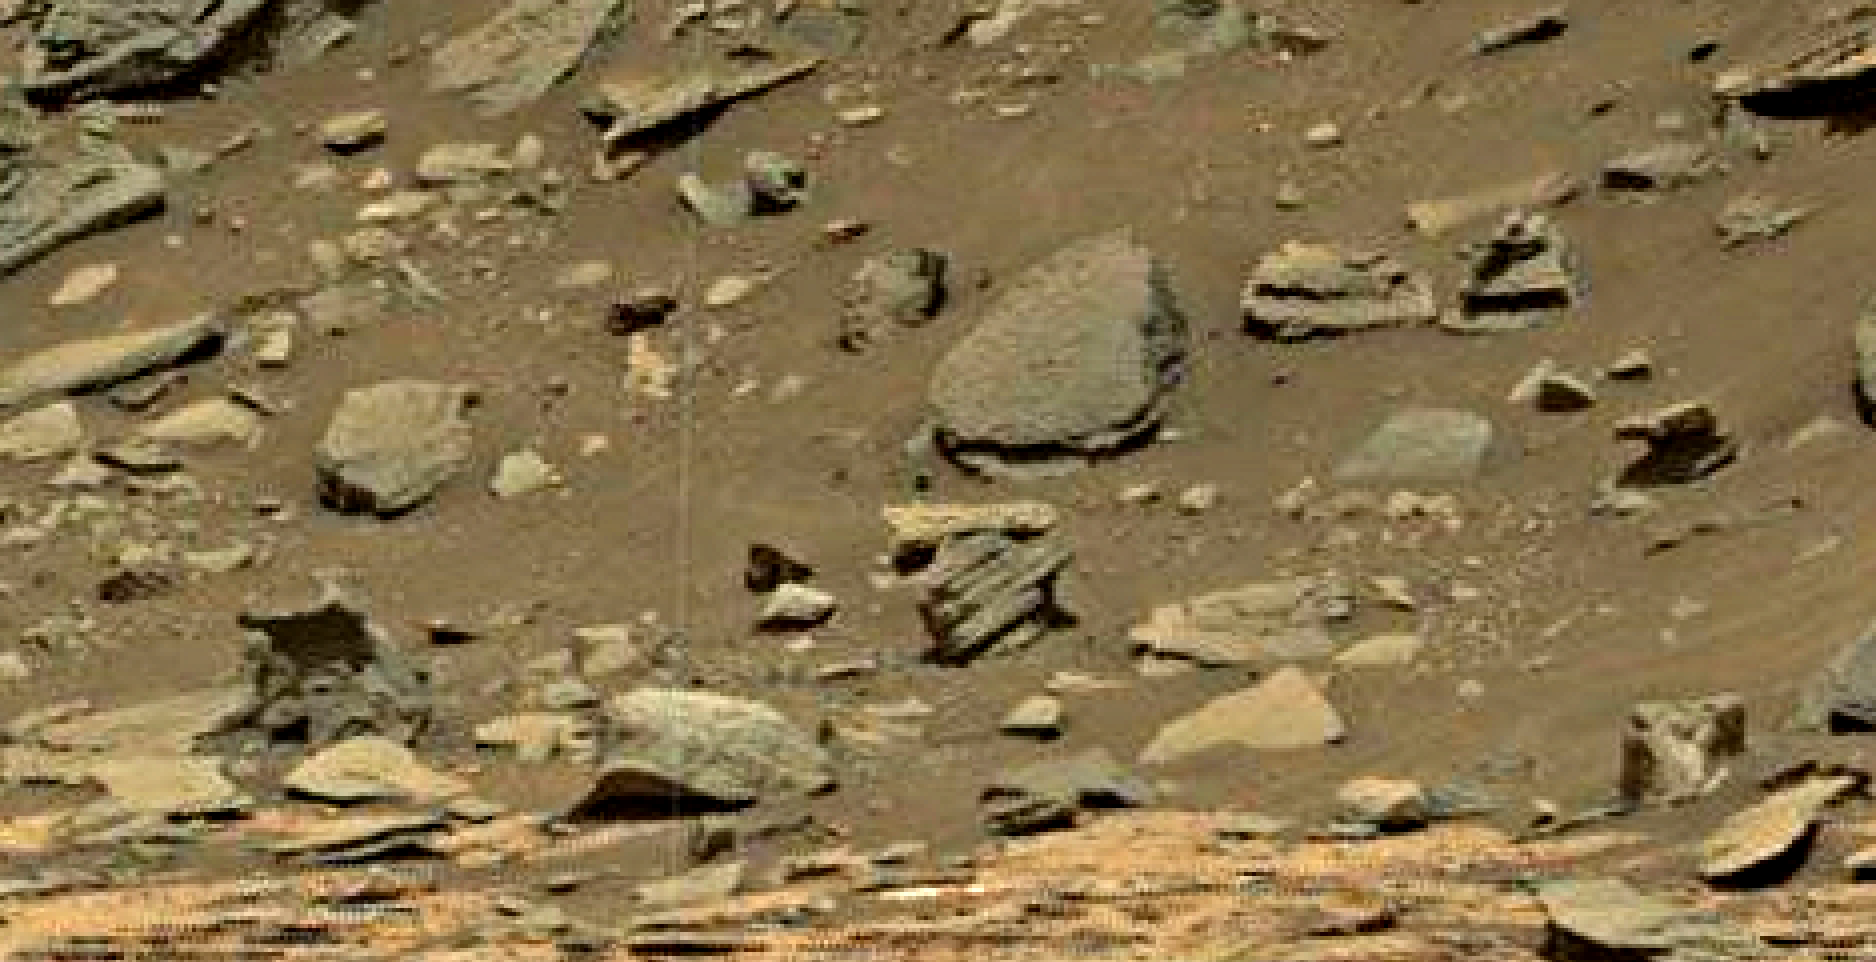 mars-sol-1455-anomaly-artifacts-3-was-life-on-mars